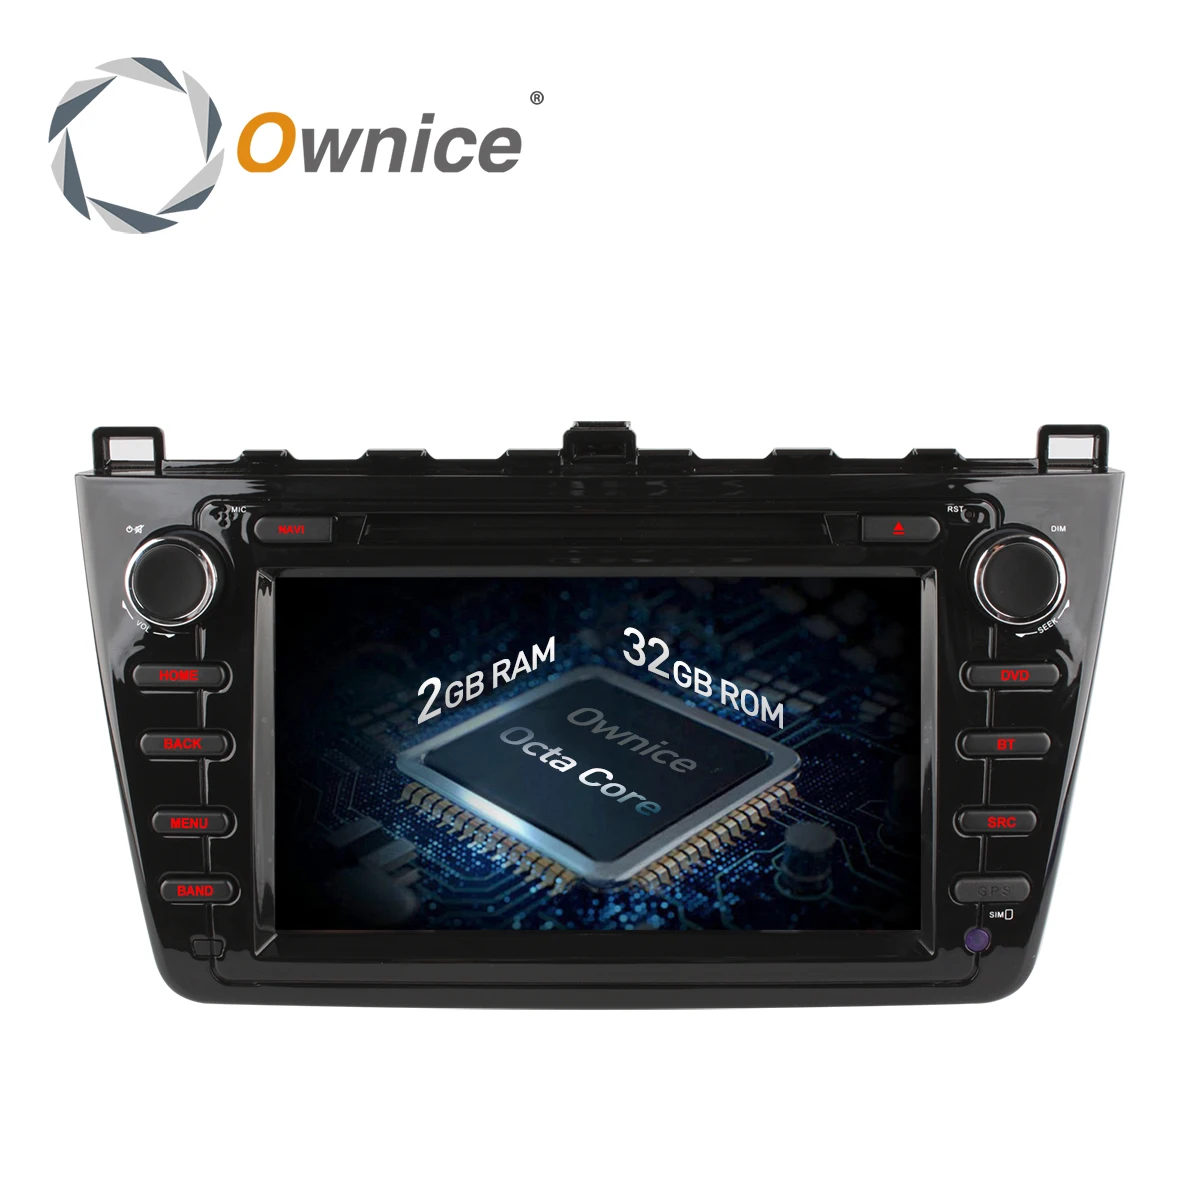 

Ownice C500 8 inch HD 1024*600 Octa Core Android 6.0 Car Radio DVD GPS player For Mazda 6 2GB RAM 32GB ROM Support WIFI 4G BT